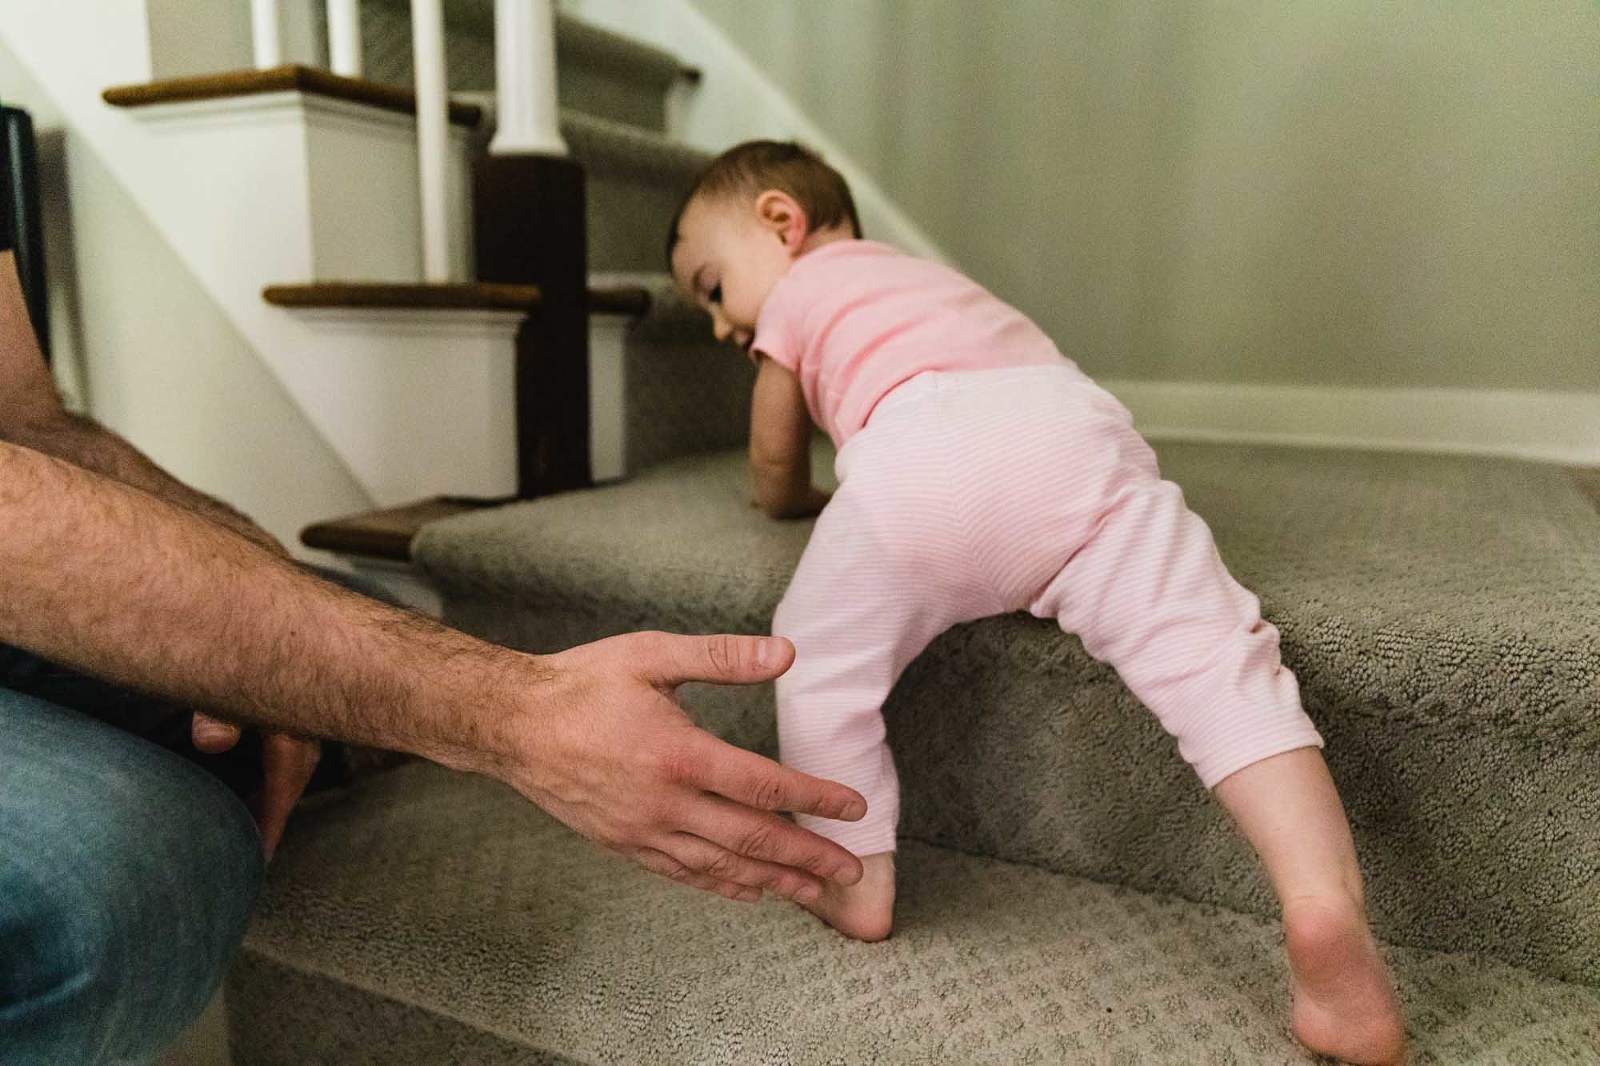 baby climbs up stairs and dad holds hand out to make sure she doesn't fall